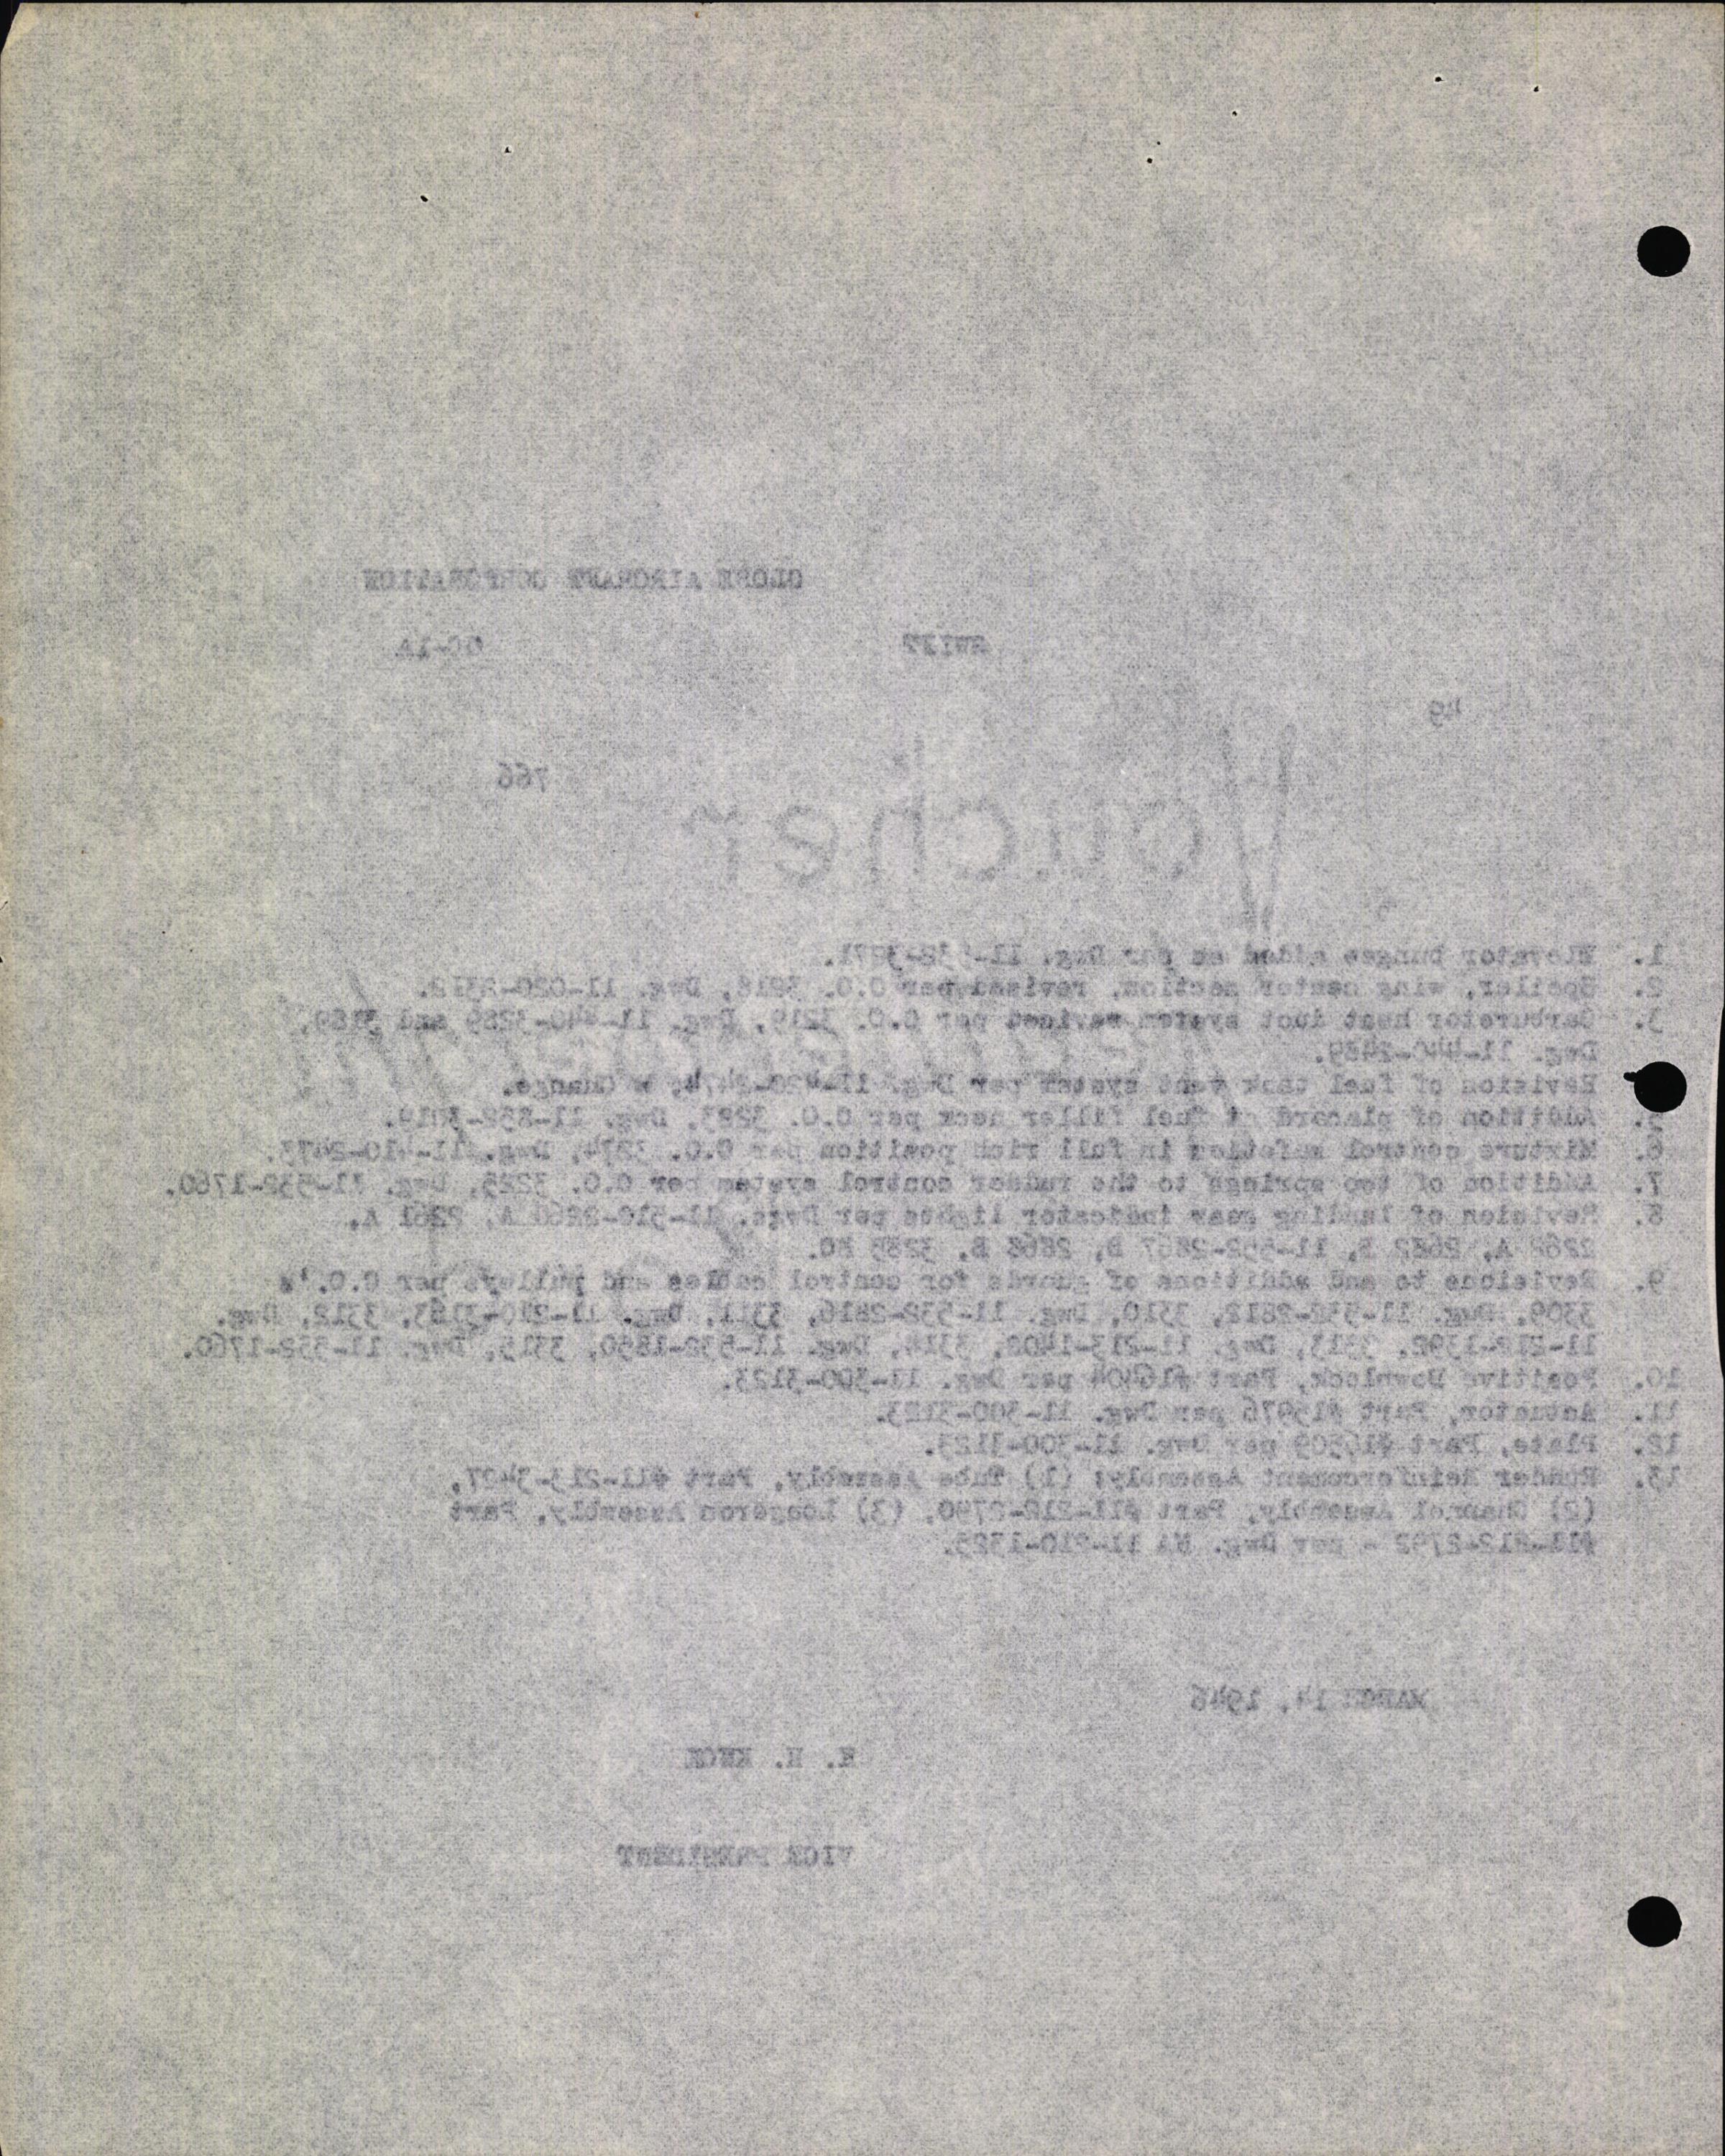 Sample page 8 from AirCorps Library document: Technical Information for Serial Number 49